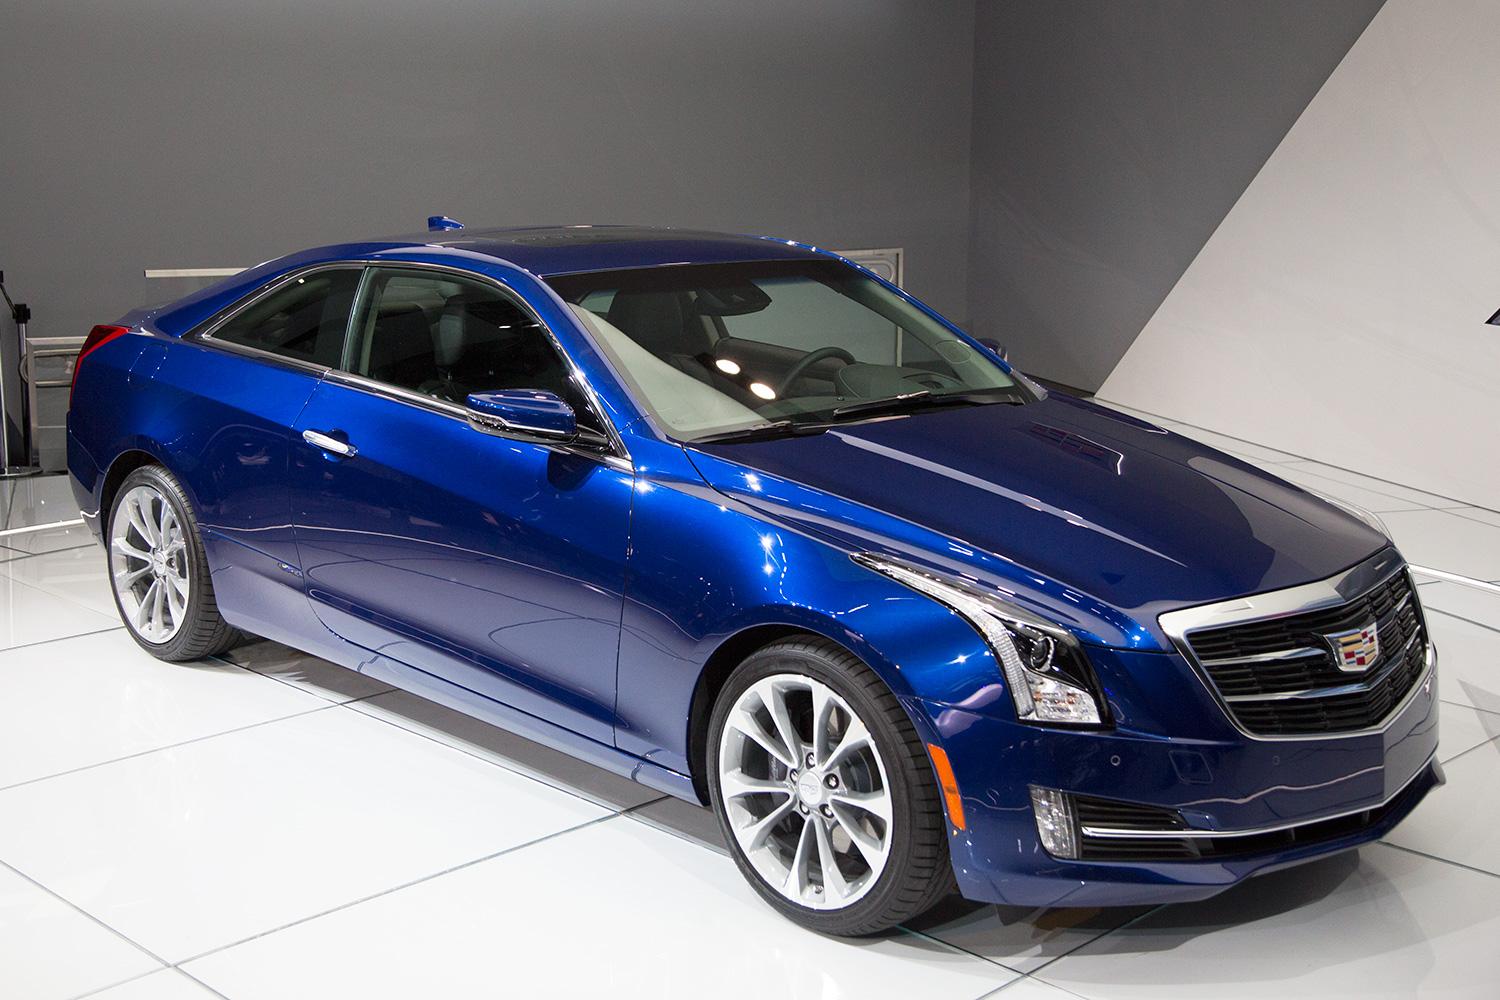 2015 Cadillac ATS Coupe front right